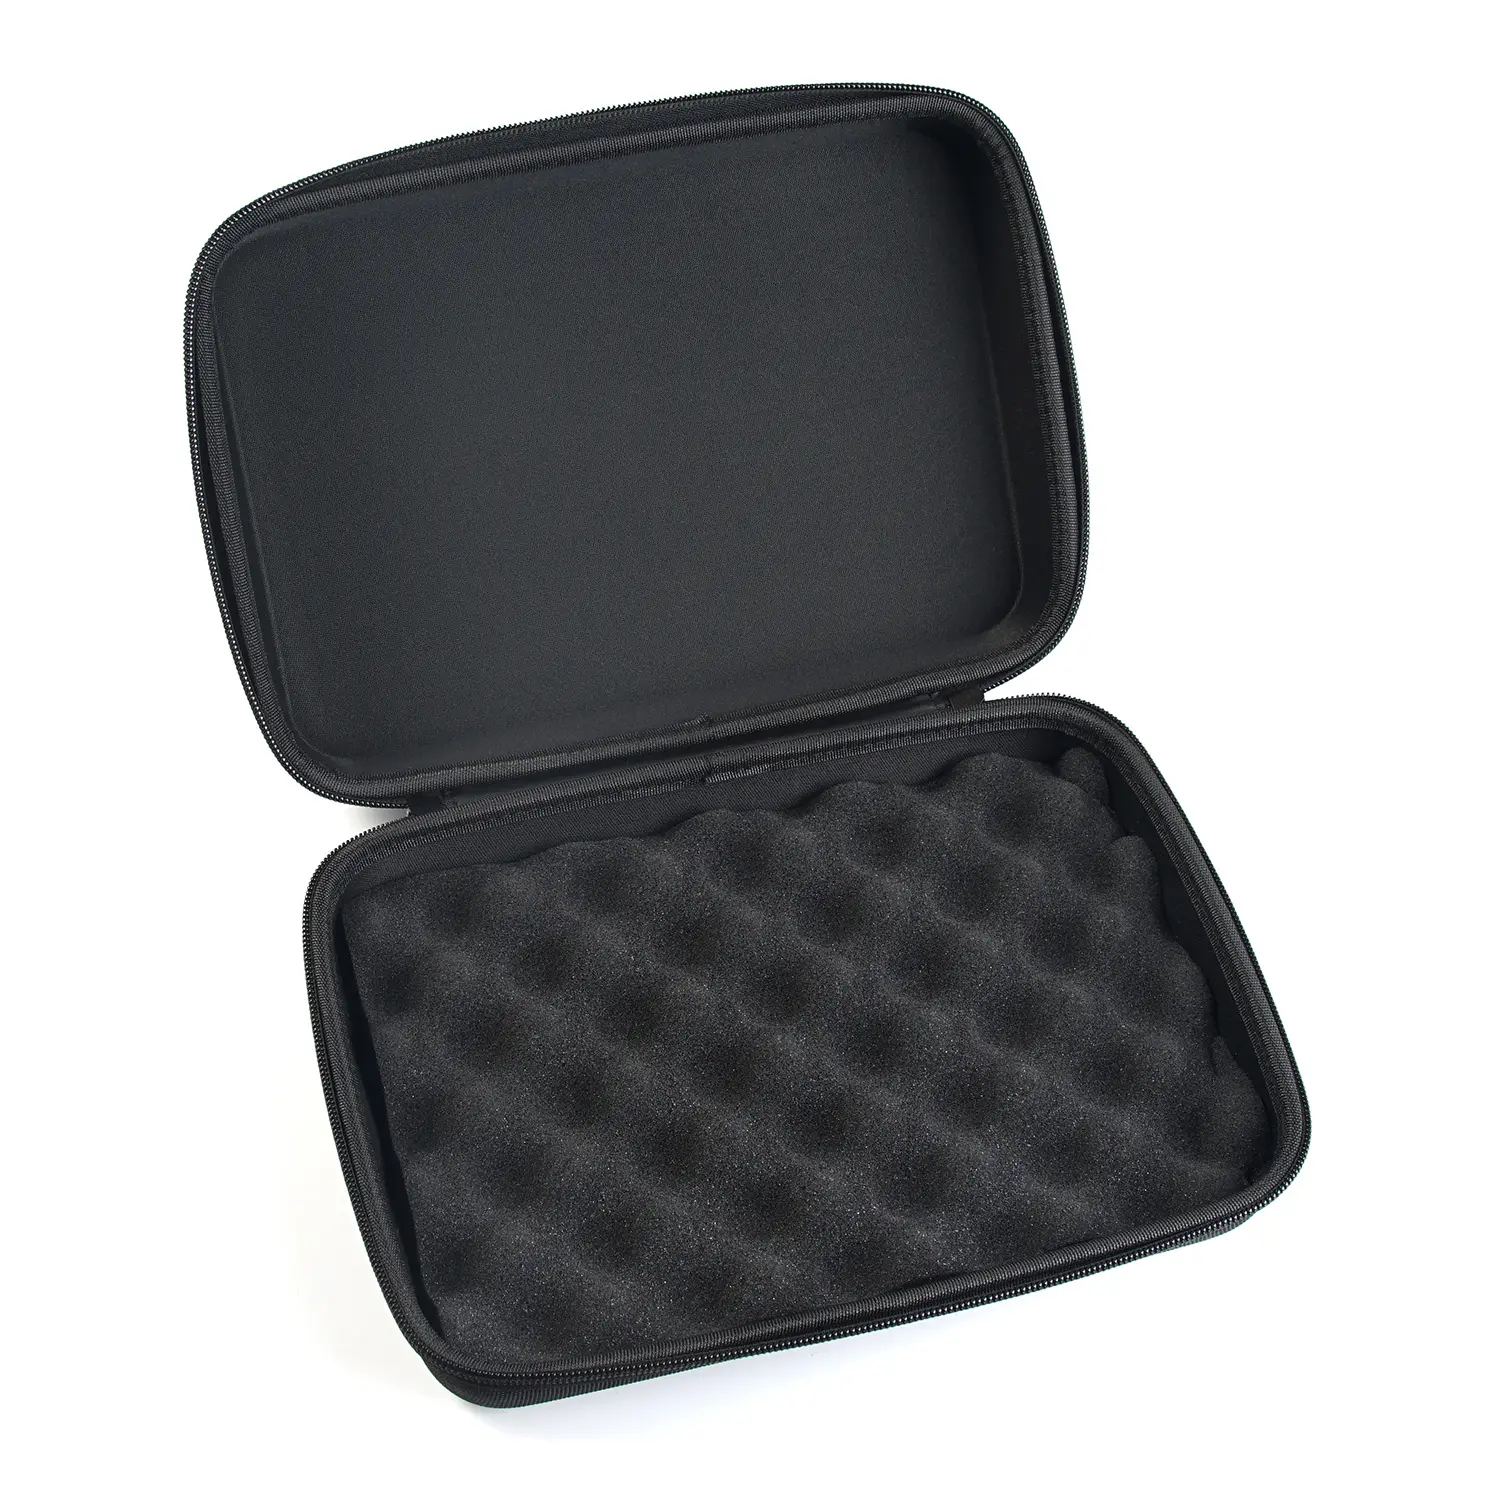 Factory Customized High Quality Square Shaped Portable Protection Hard EVA Carrying Case With double zipper